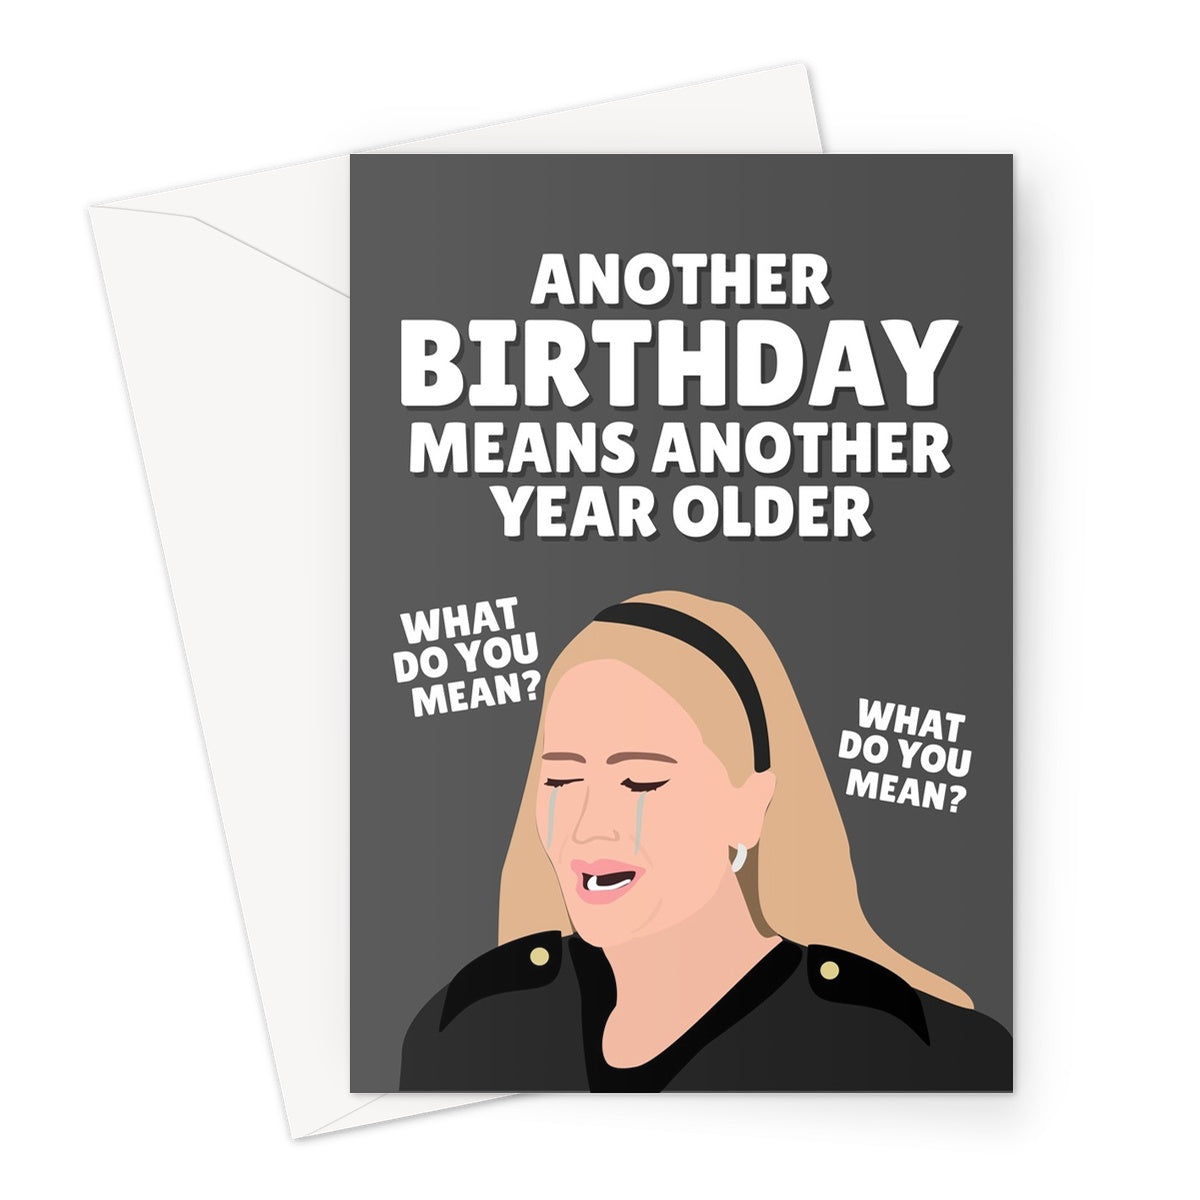 Another Birthday Means Another Year Older (What Do You Mean?) Jennifer Lawrence Funny Meme Hot Spicy Crying Celebrity  Greeting Card